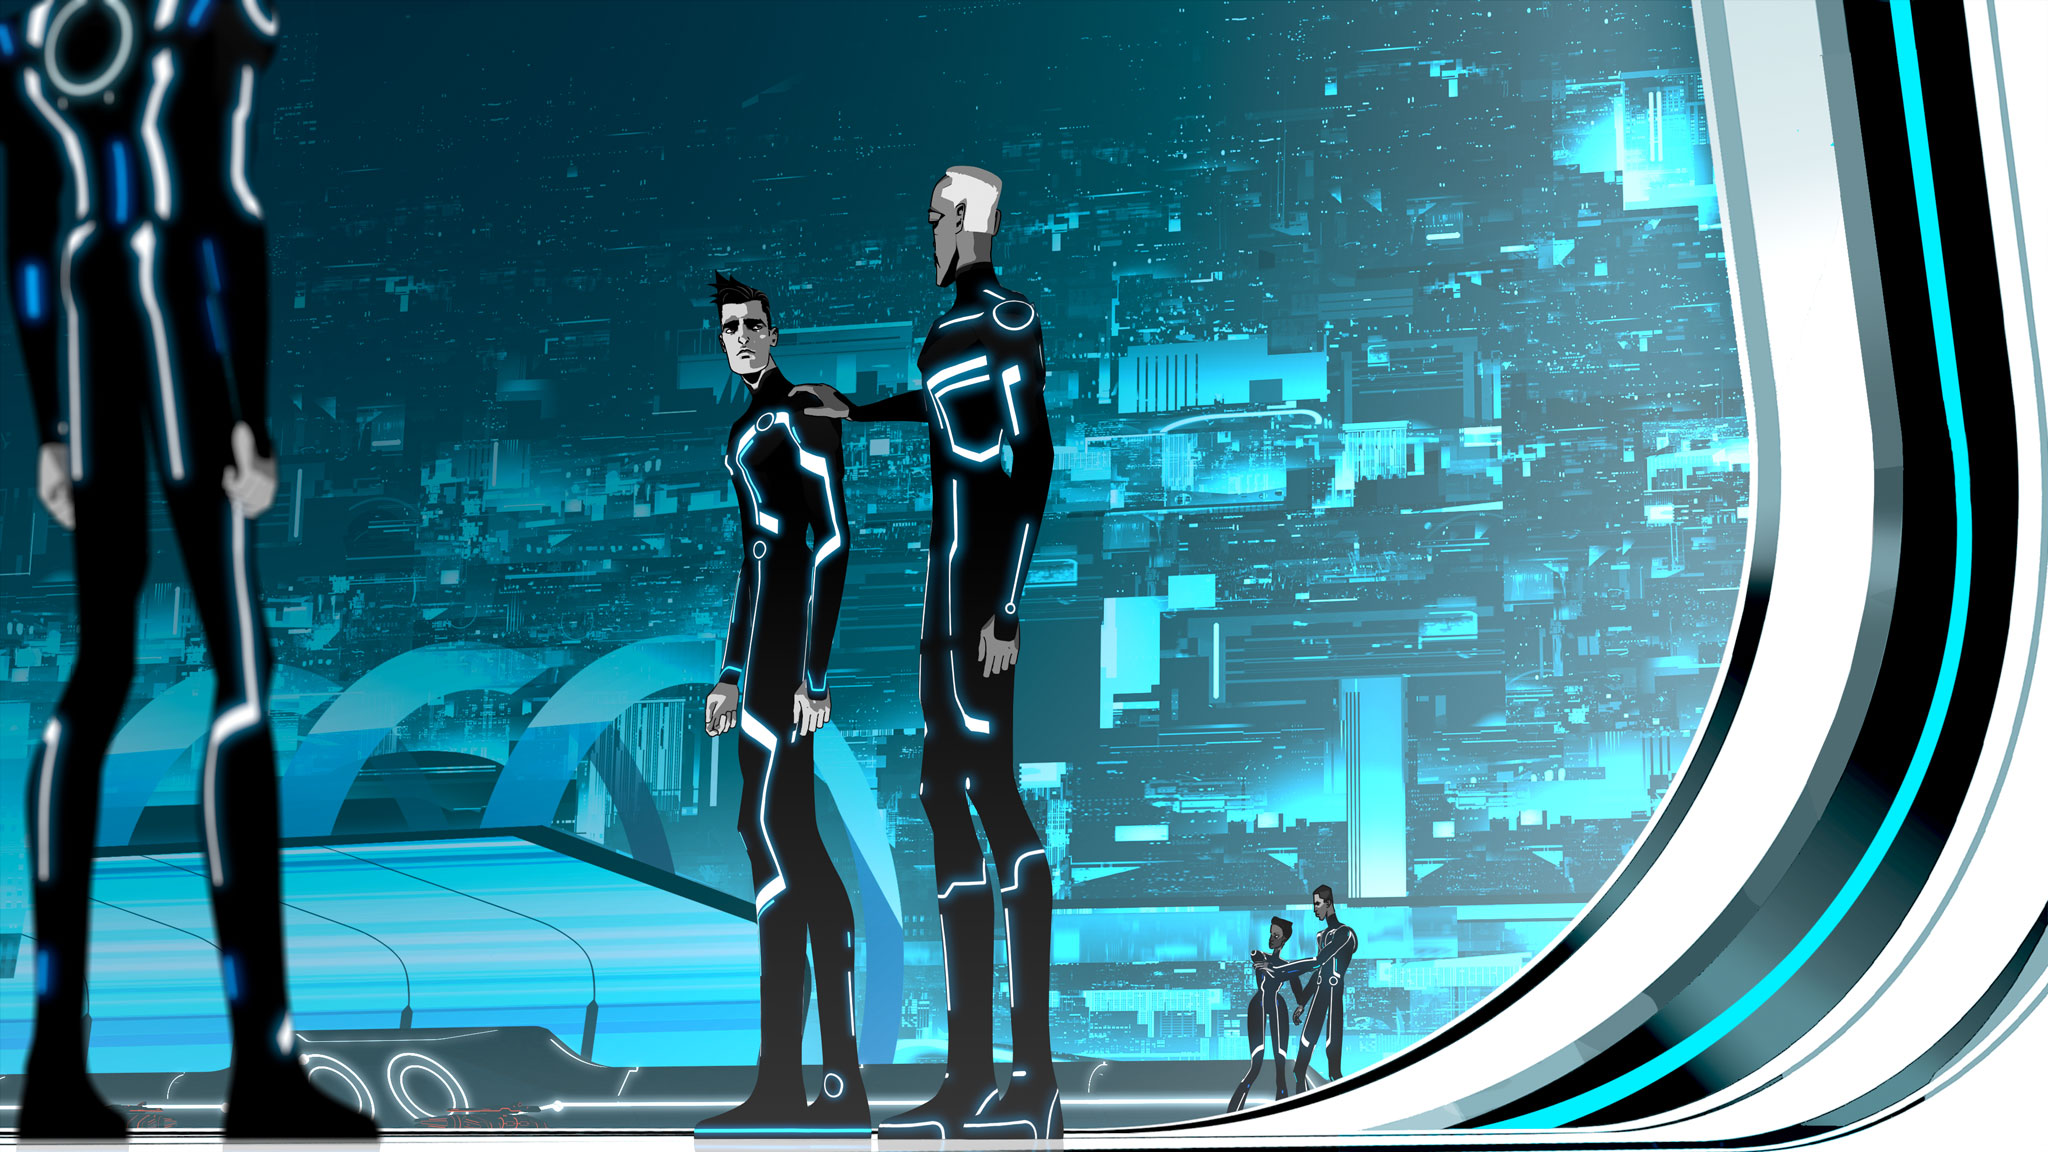 Tron Uprising Backgrounds Pictures Images.